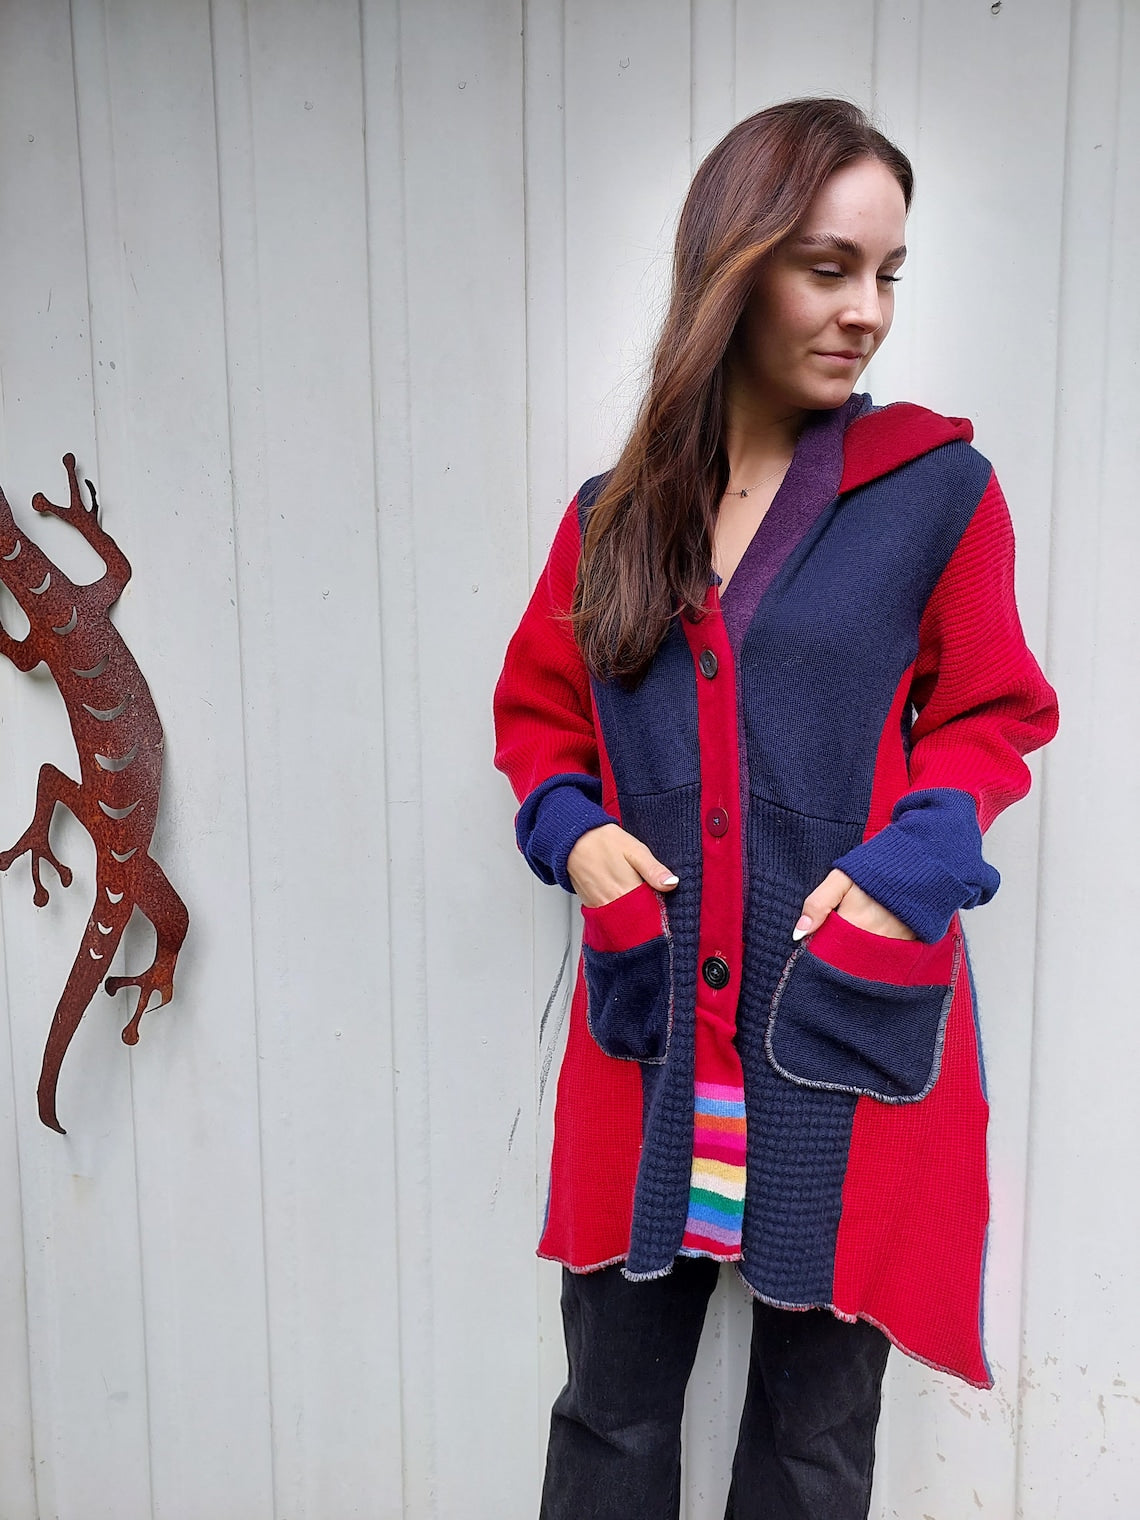 Upcycled Sweatercoat for Women Funky Boho Cardigan  Red and Navy